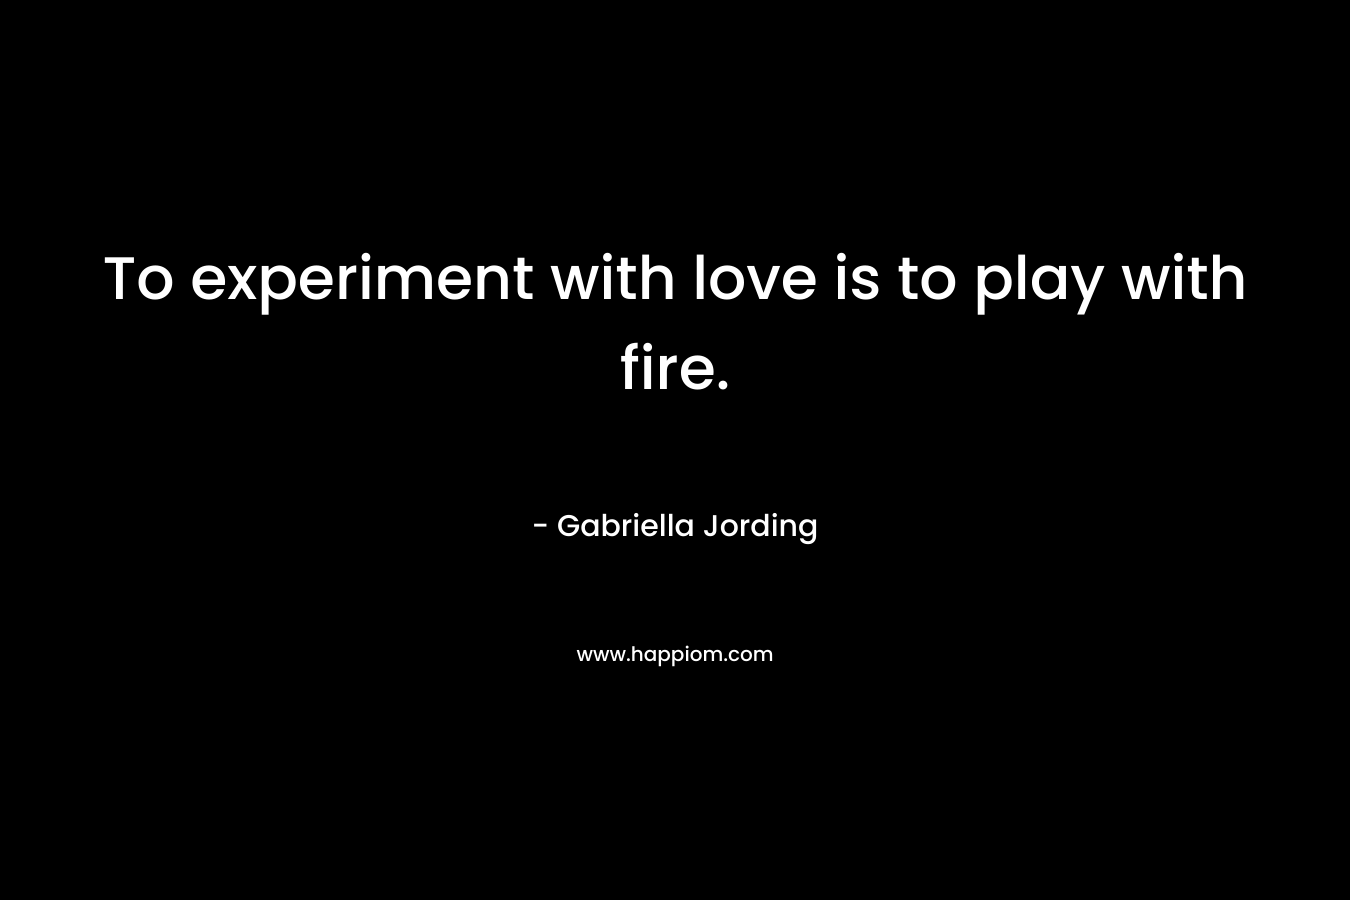 To experiment with love is to play with fire. – Gabriella Jording